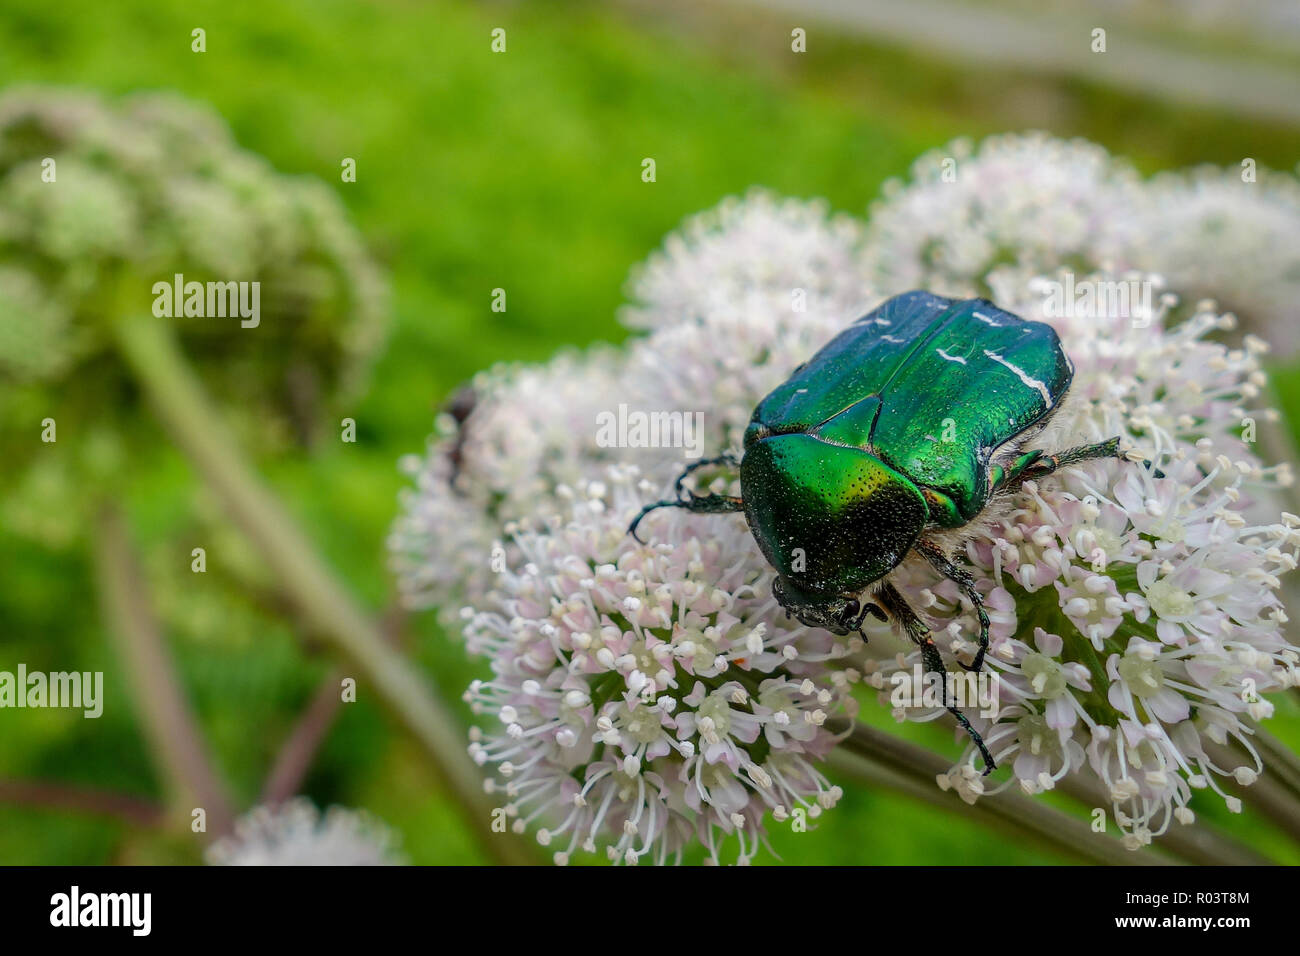 A metallic green coloured iridescent beetle called a Rose Chafer or Green Rose Chafer (Cetonia aurata) on a Cow Parsley (Anthriscus sylvestris) plant Stock Photo